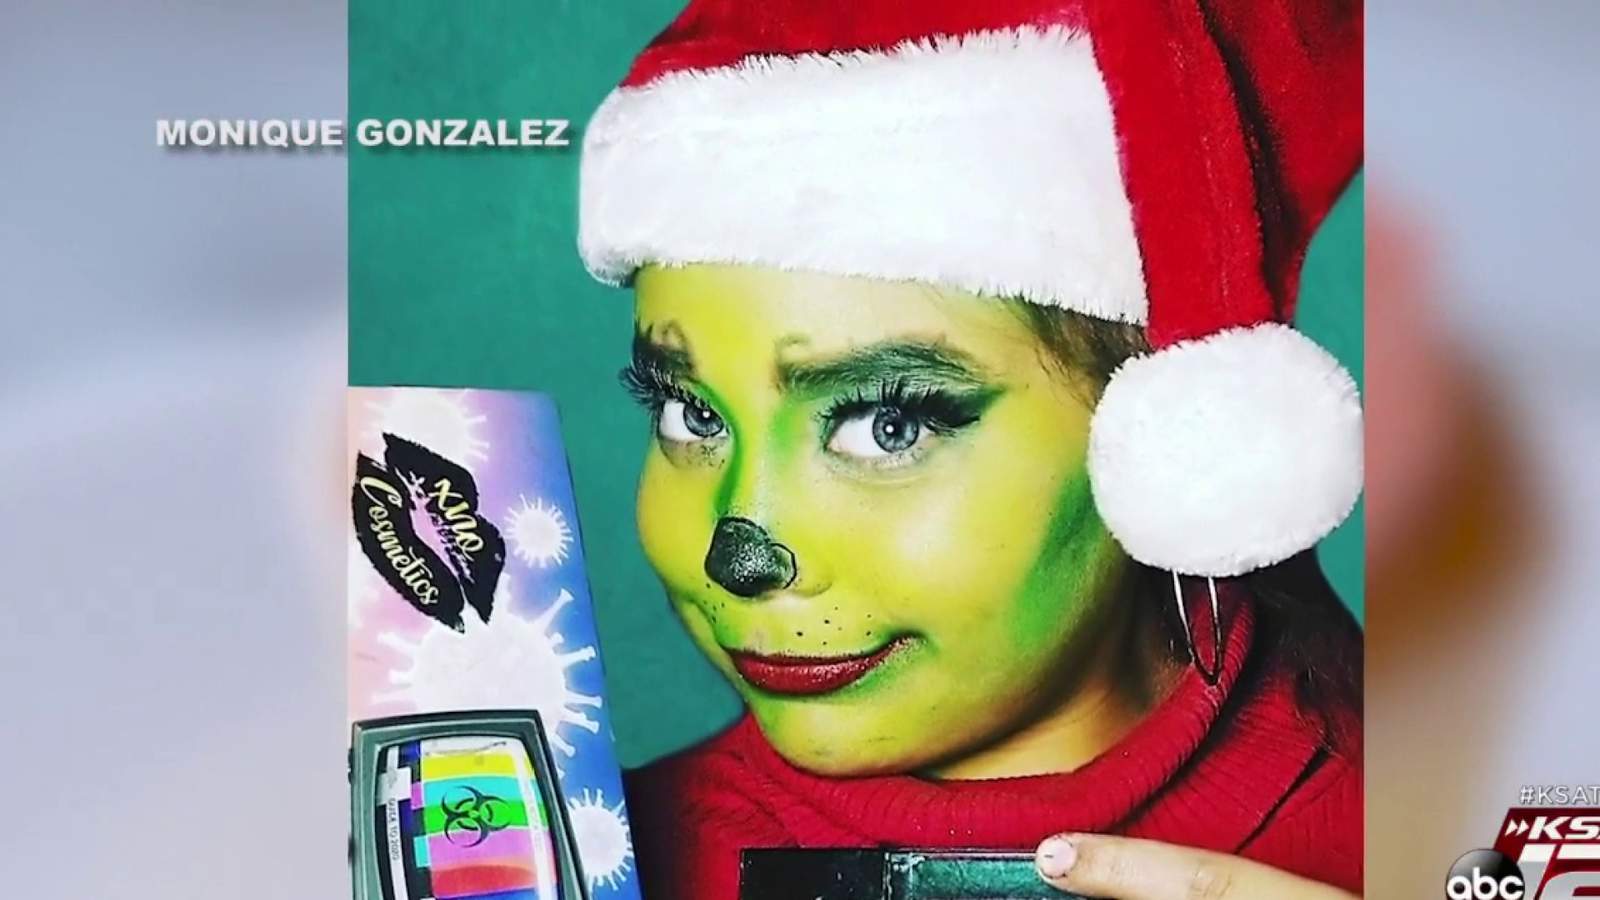 What’s Up South Texas!: Pre-teen makeup artist uses passion for makeup to give back to community